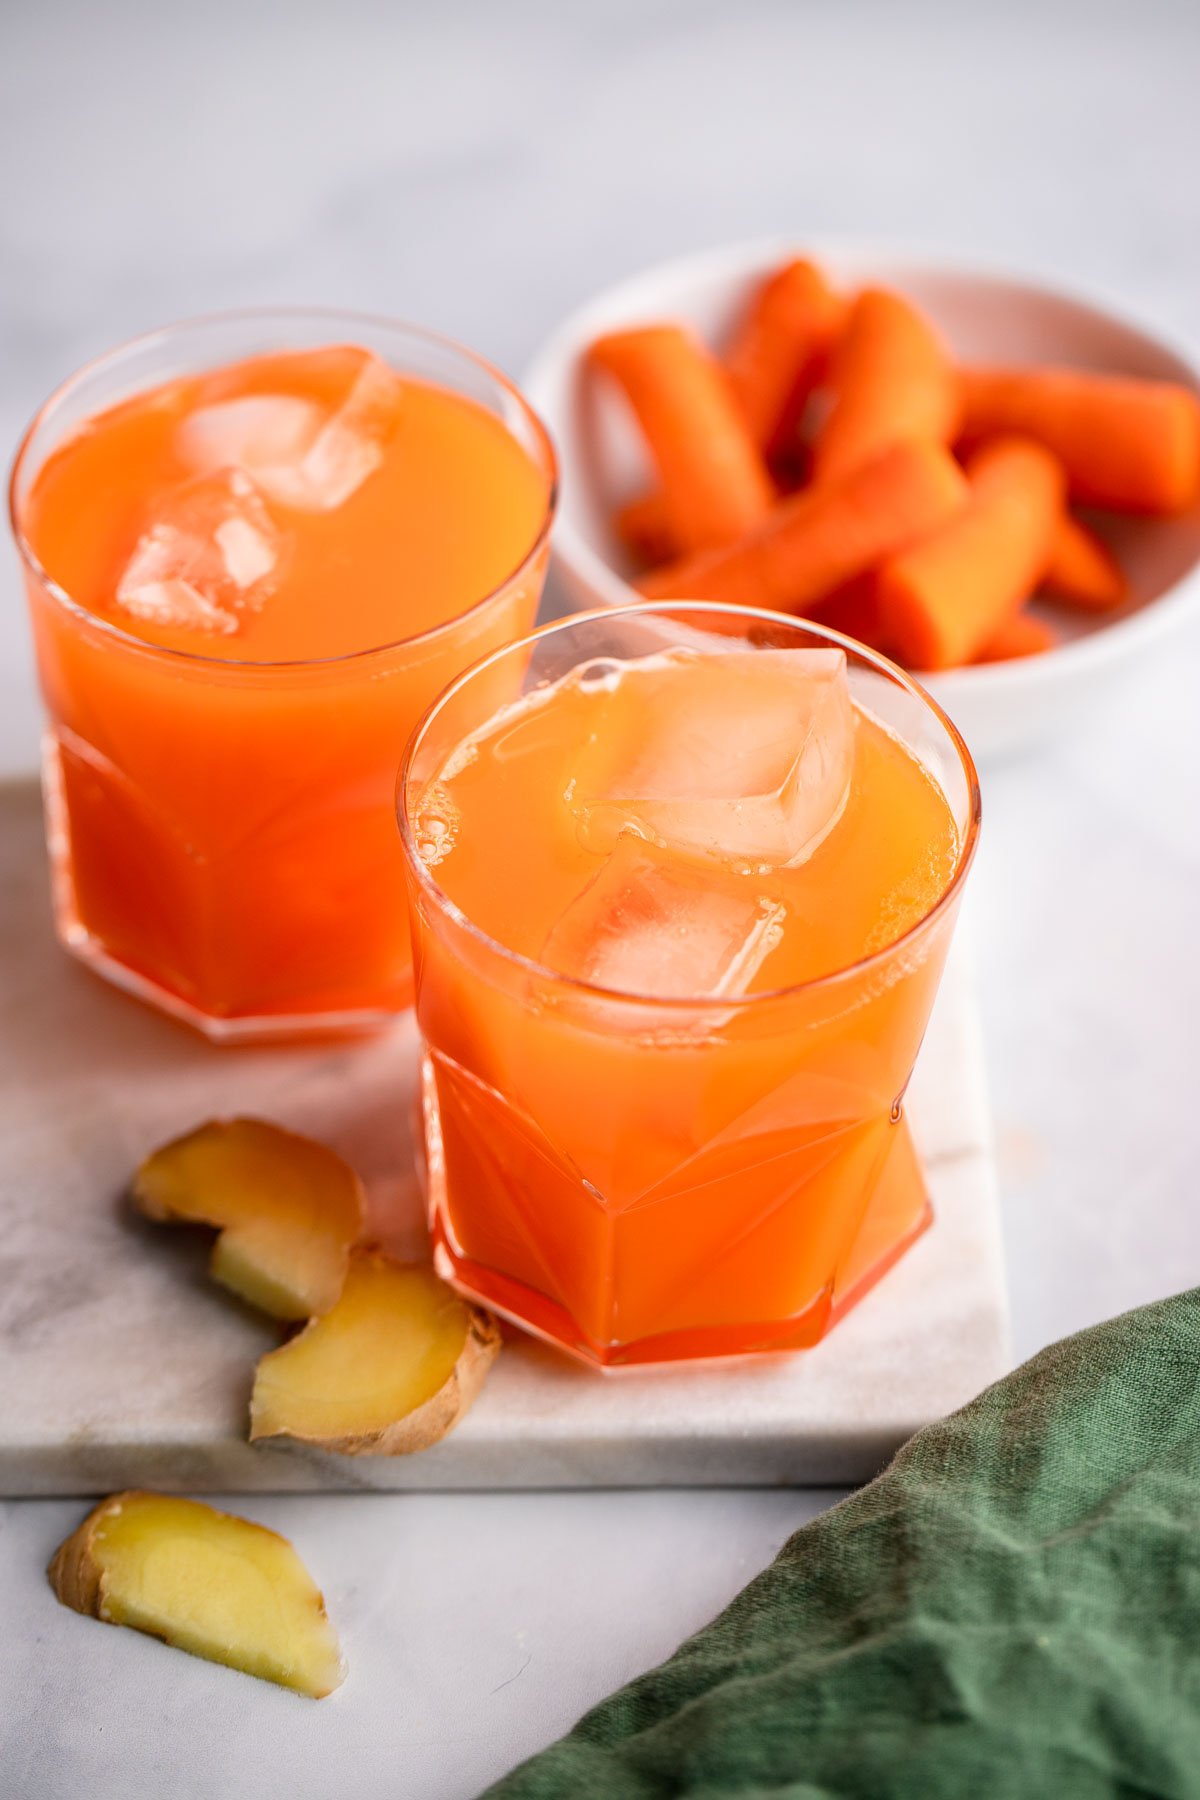 carrot and ginger juice in a glass with ice cubes.